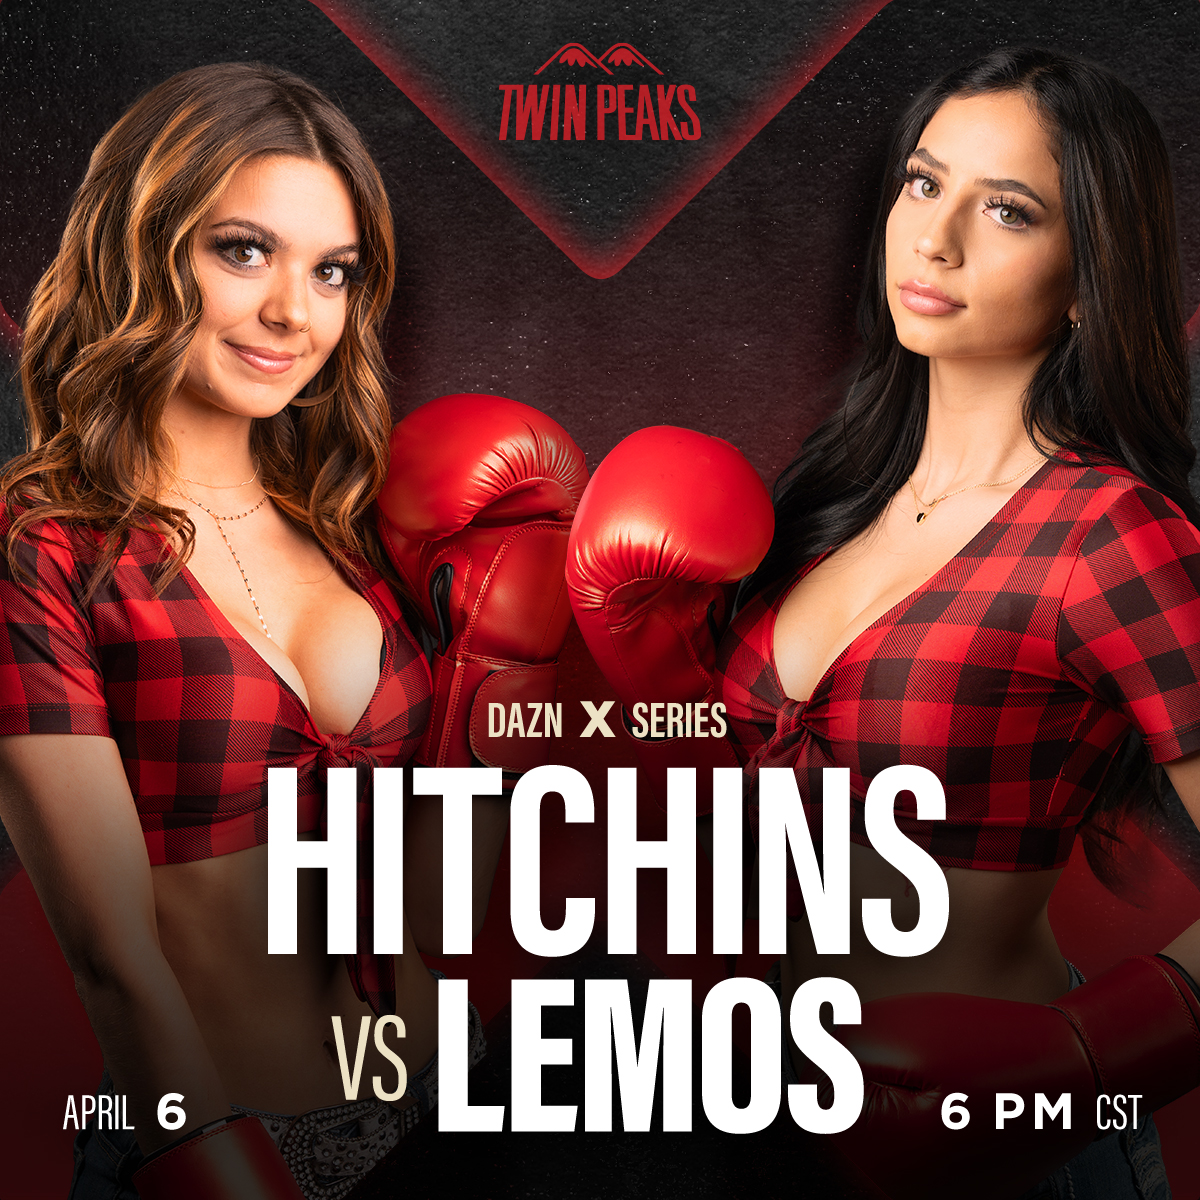 Super-lightweights Richardson Hitchins and Gustavo Daniel Lemos put their undefeated records on the line tonight. Catch every jab with scenic views and scratch bites at Twin Peaks. #twinpeaksrestaurants #twinpeaksgirls #bestviewsinthegame #dazn #sportsbar #boxing